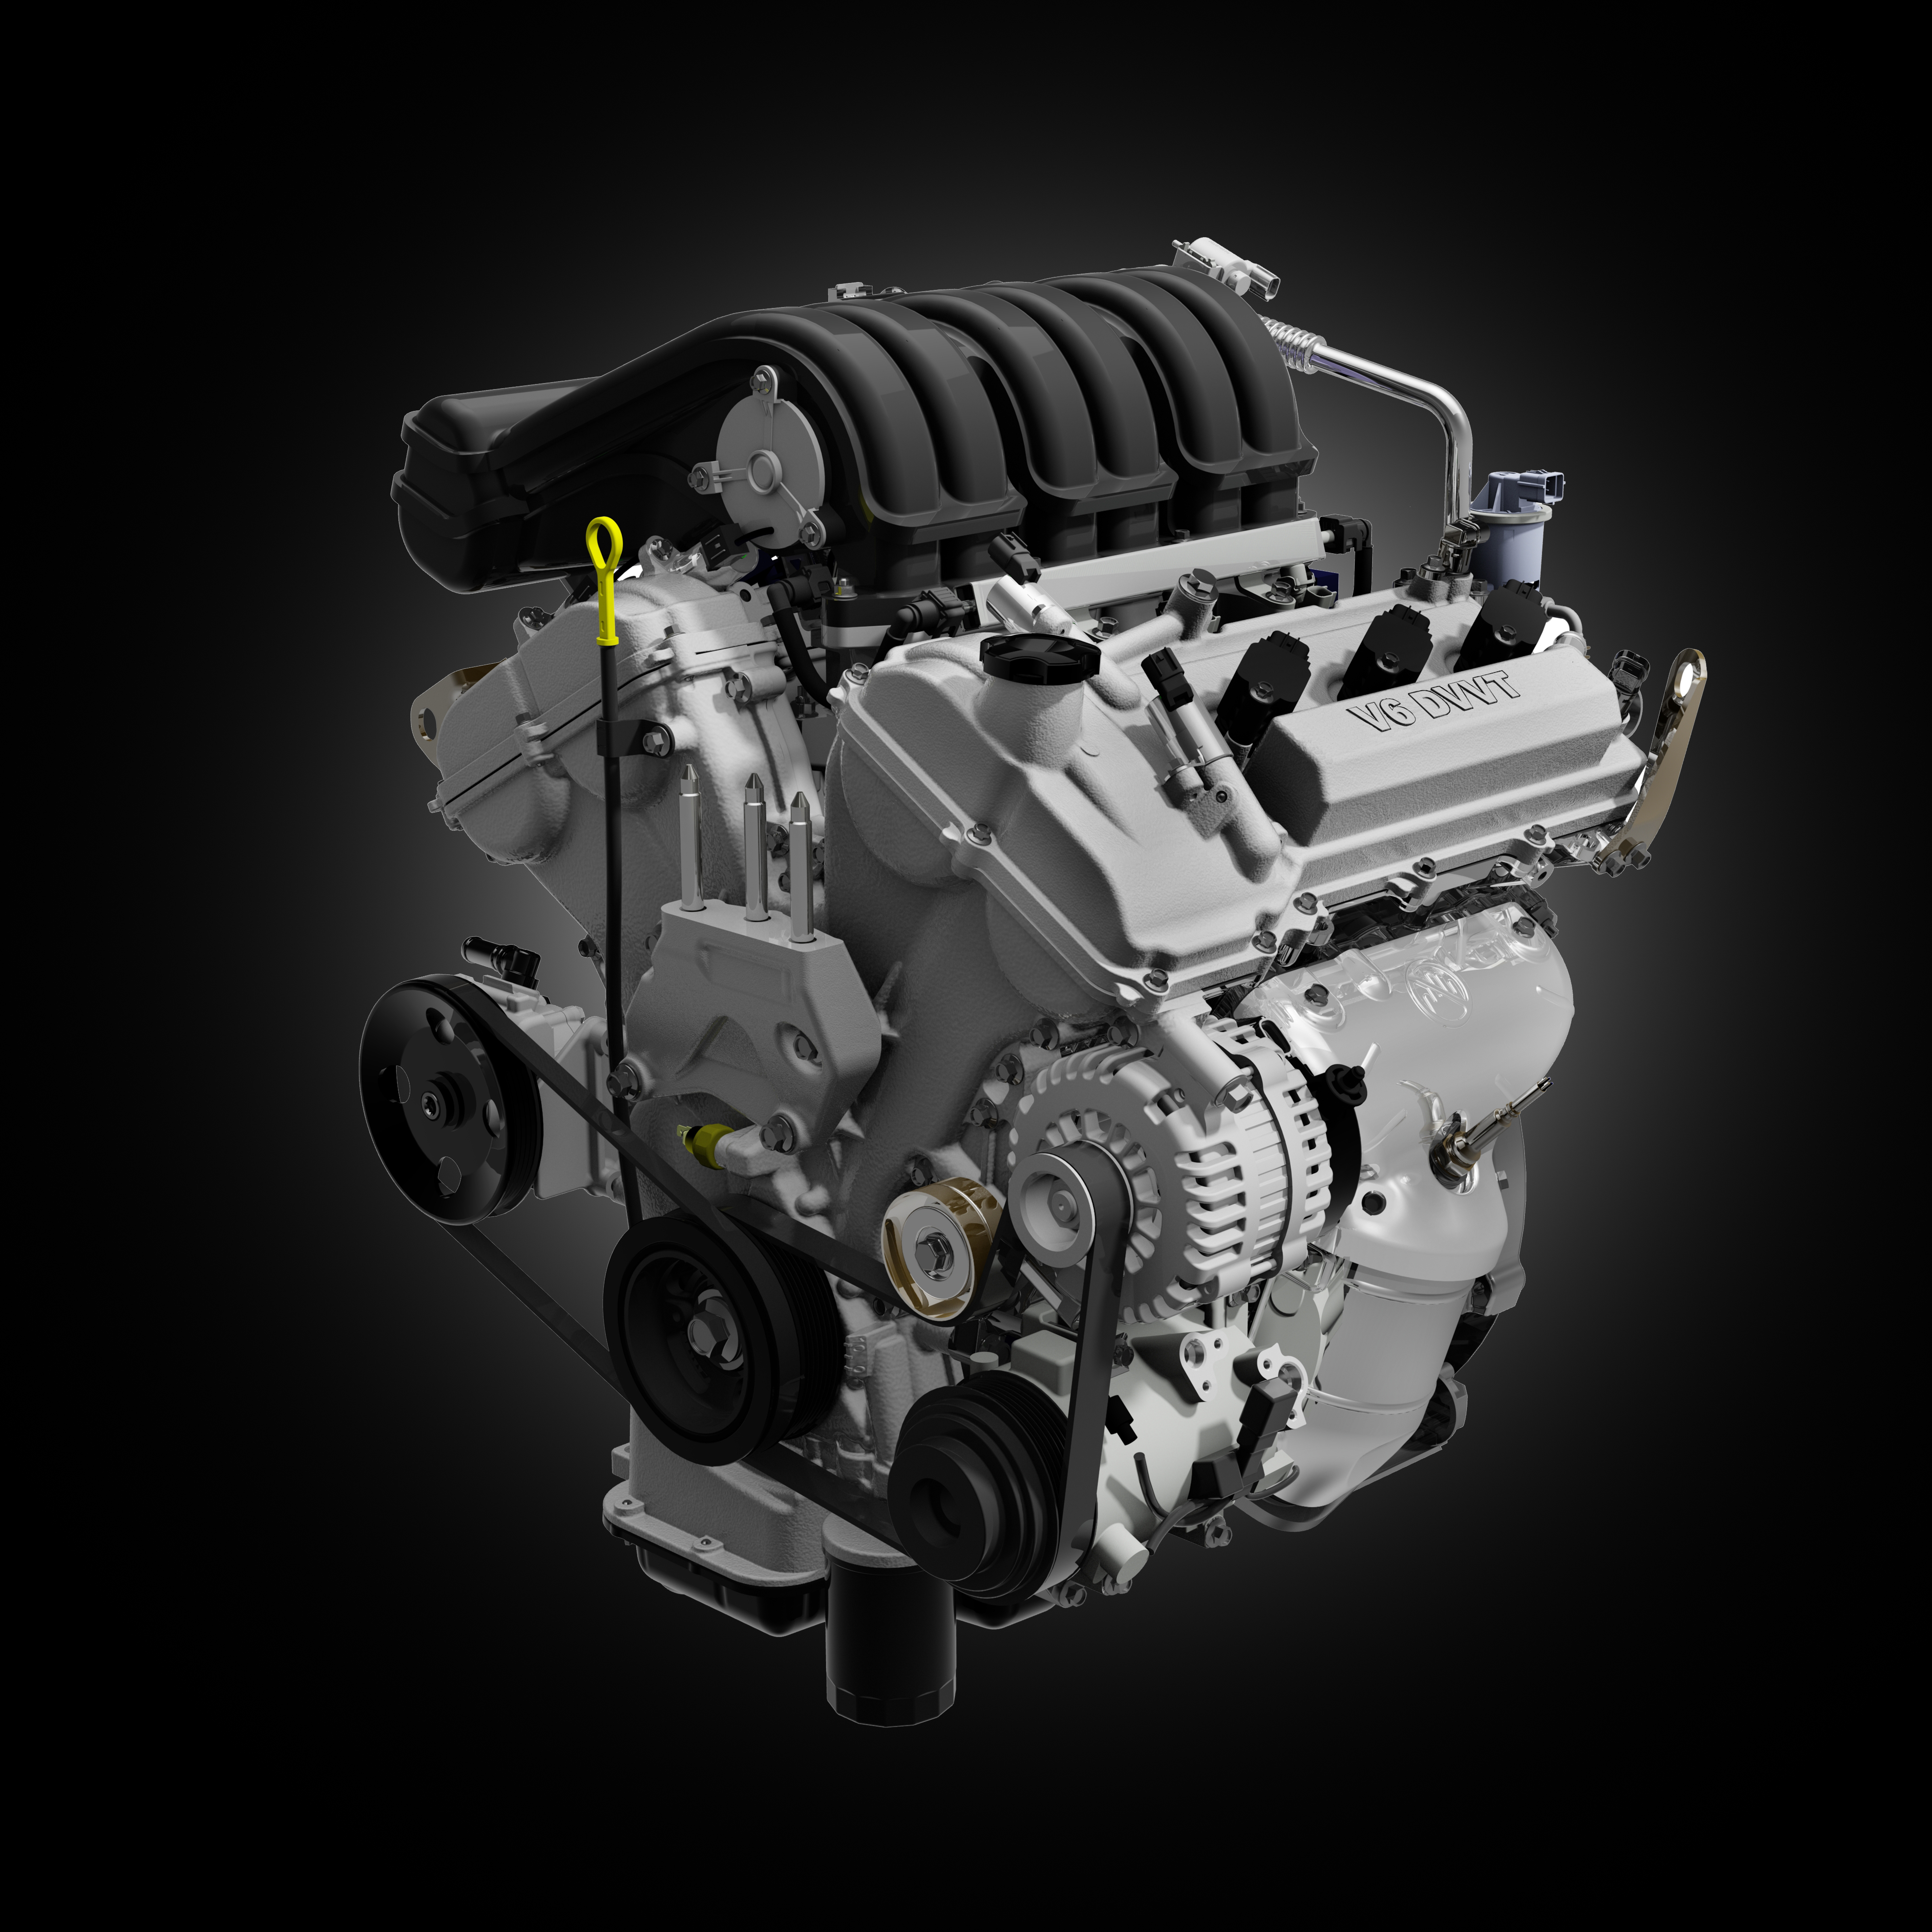 02 R&D and manufacturing of V6 engine